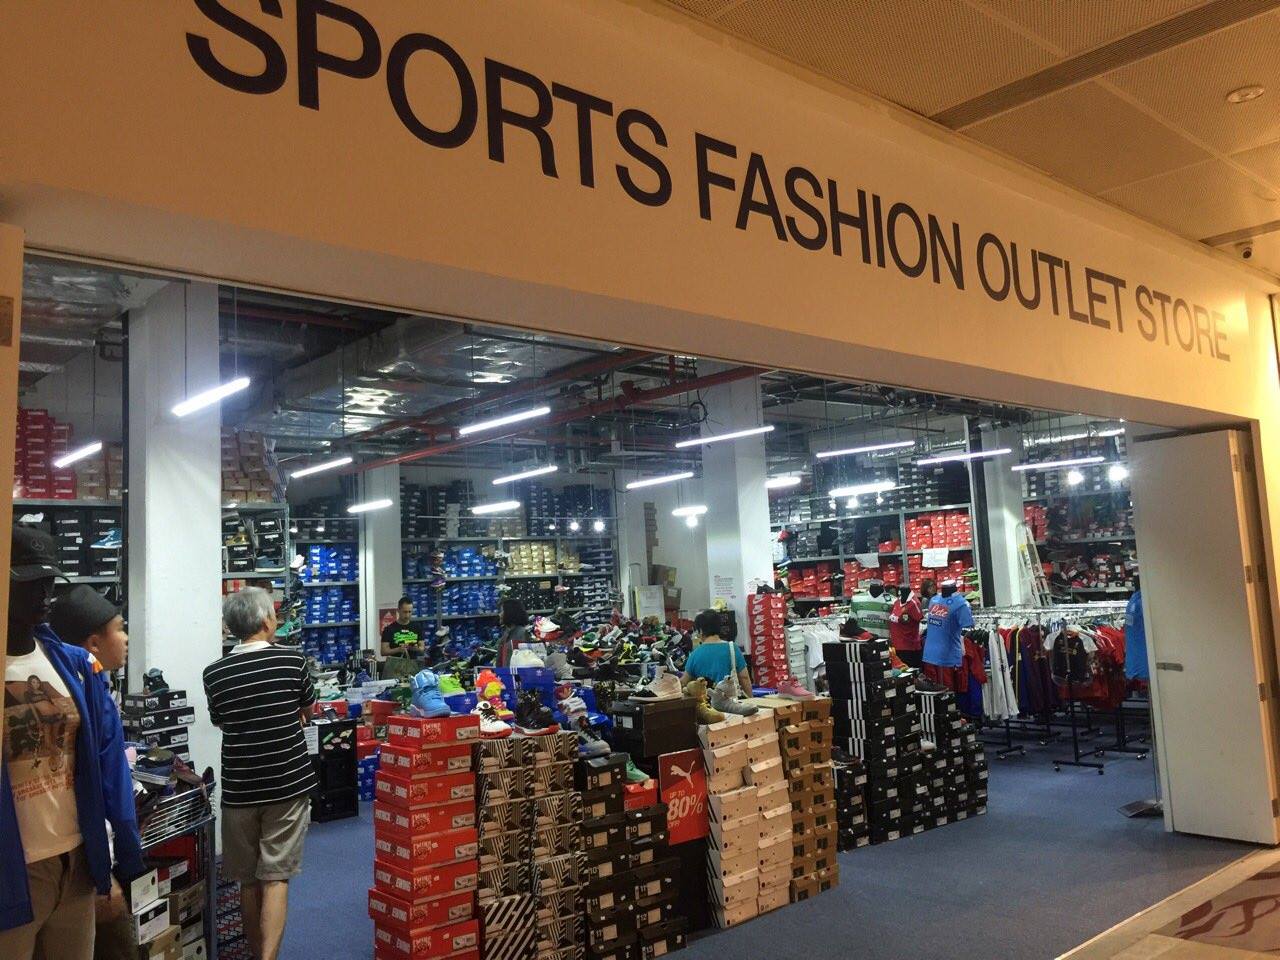 Sports Fashion Outlet Store